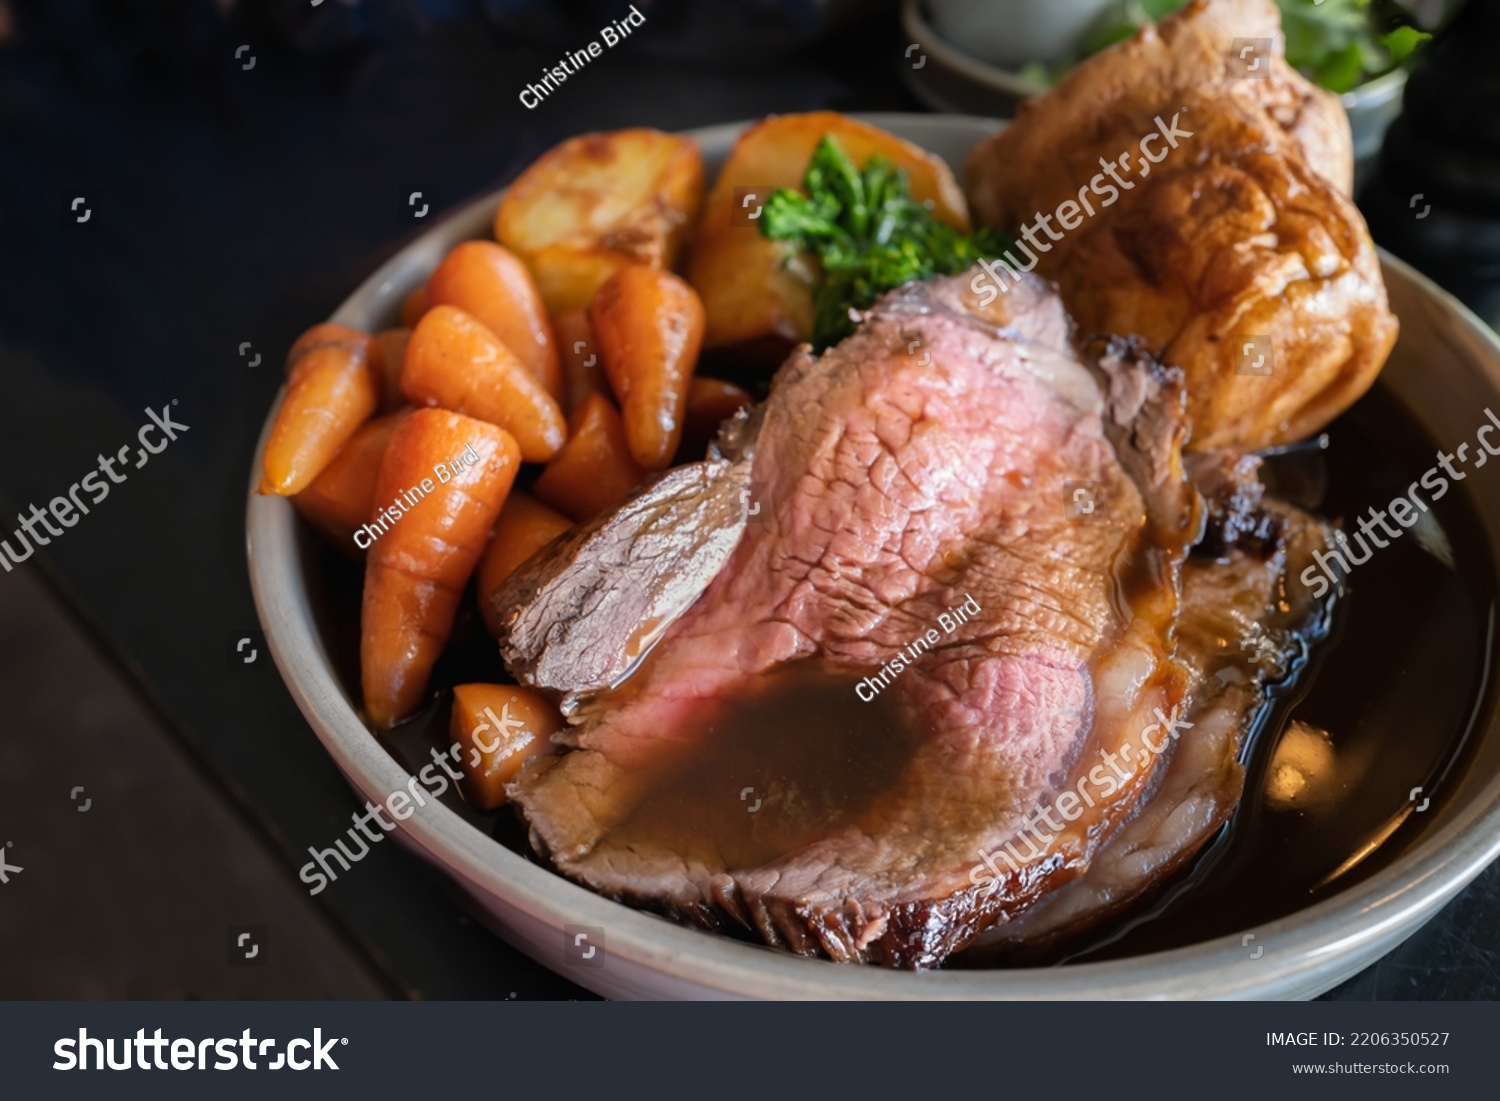 Roast beef slices on a plate with carrots, roast potatoes, a Yorkshire pudding and gravy, making a complete Sunday roast meal.  #2206350527